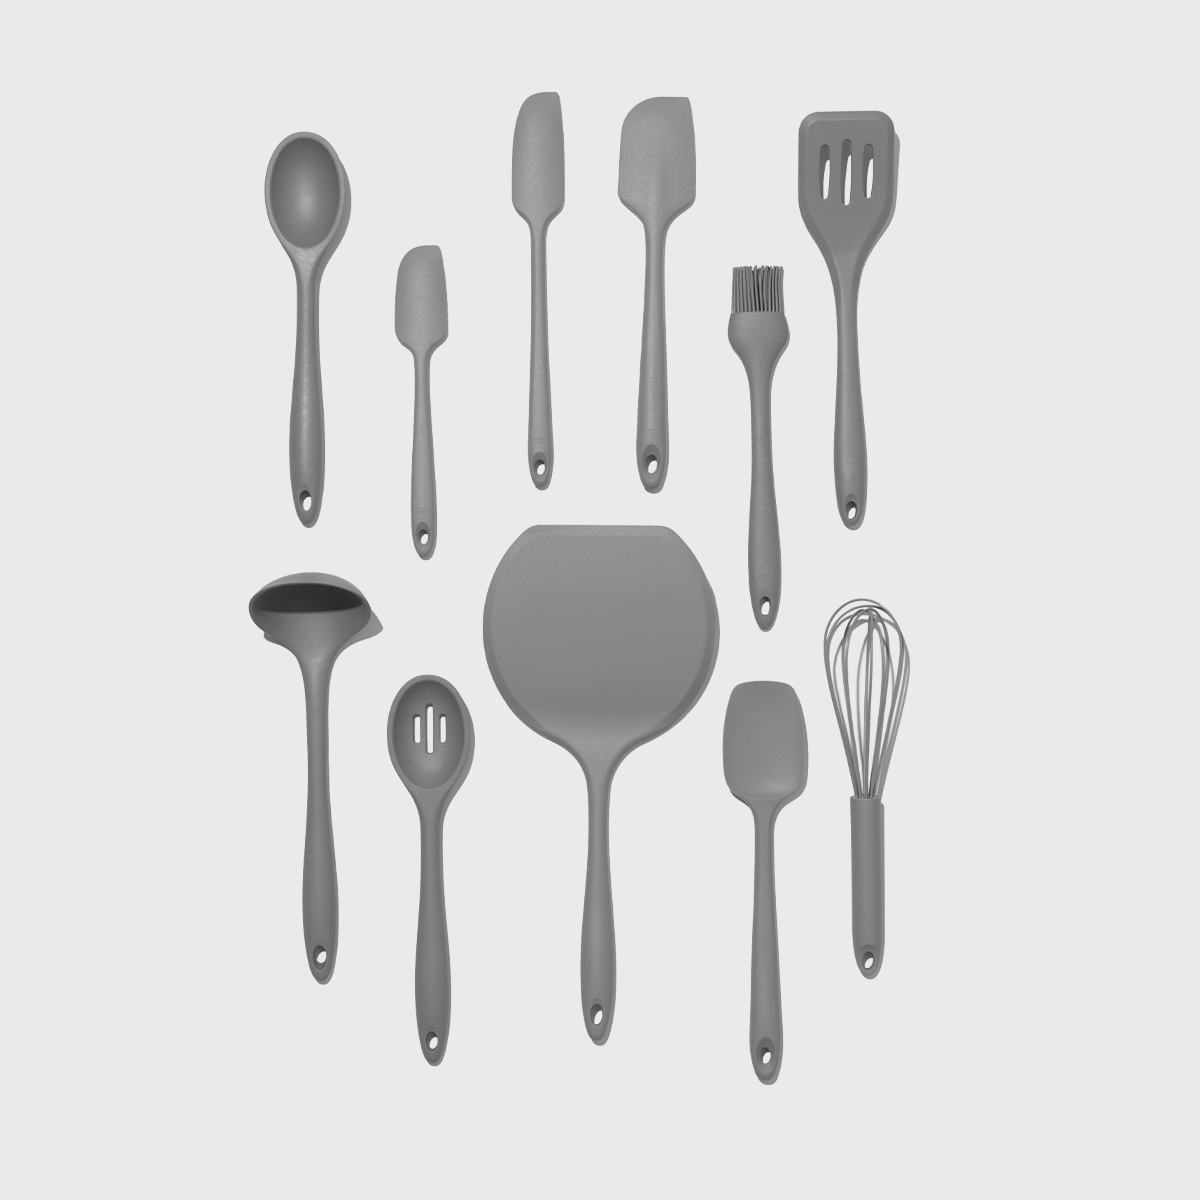 Kitchen Utensils, from a Trade Catalogue of Domestic Goods and